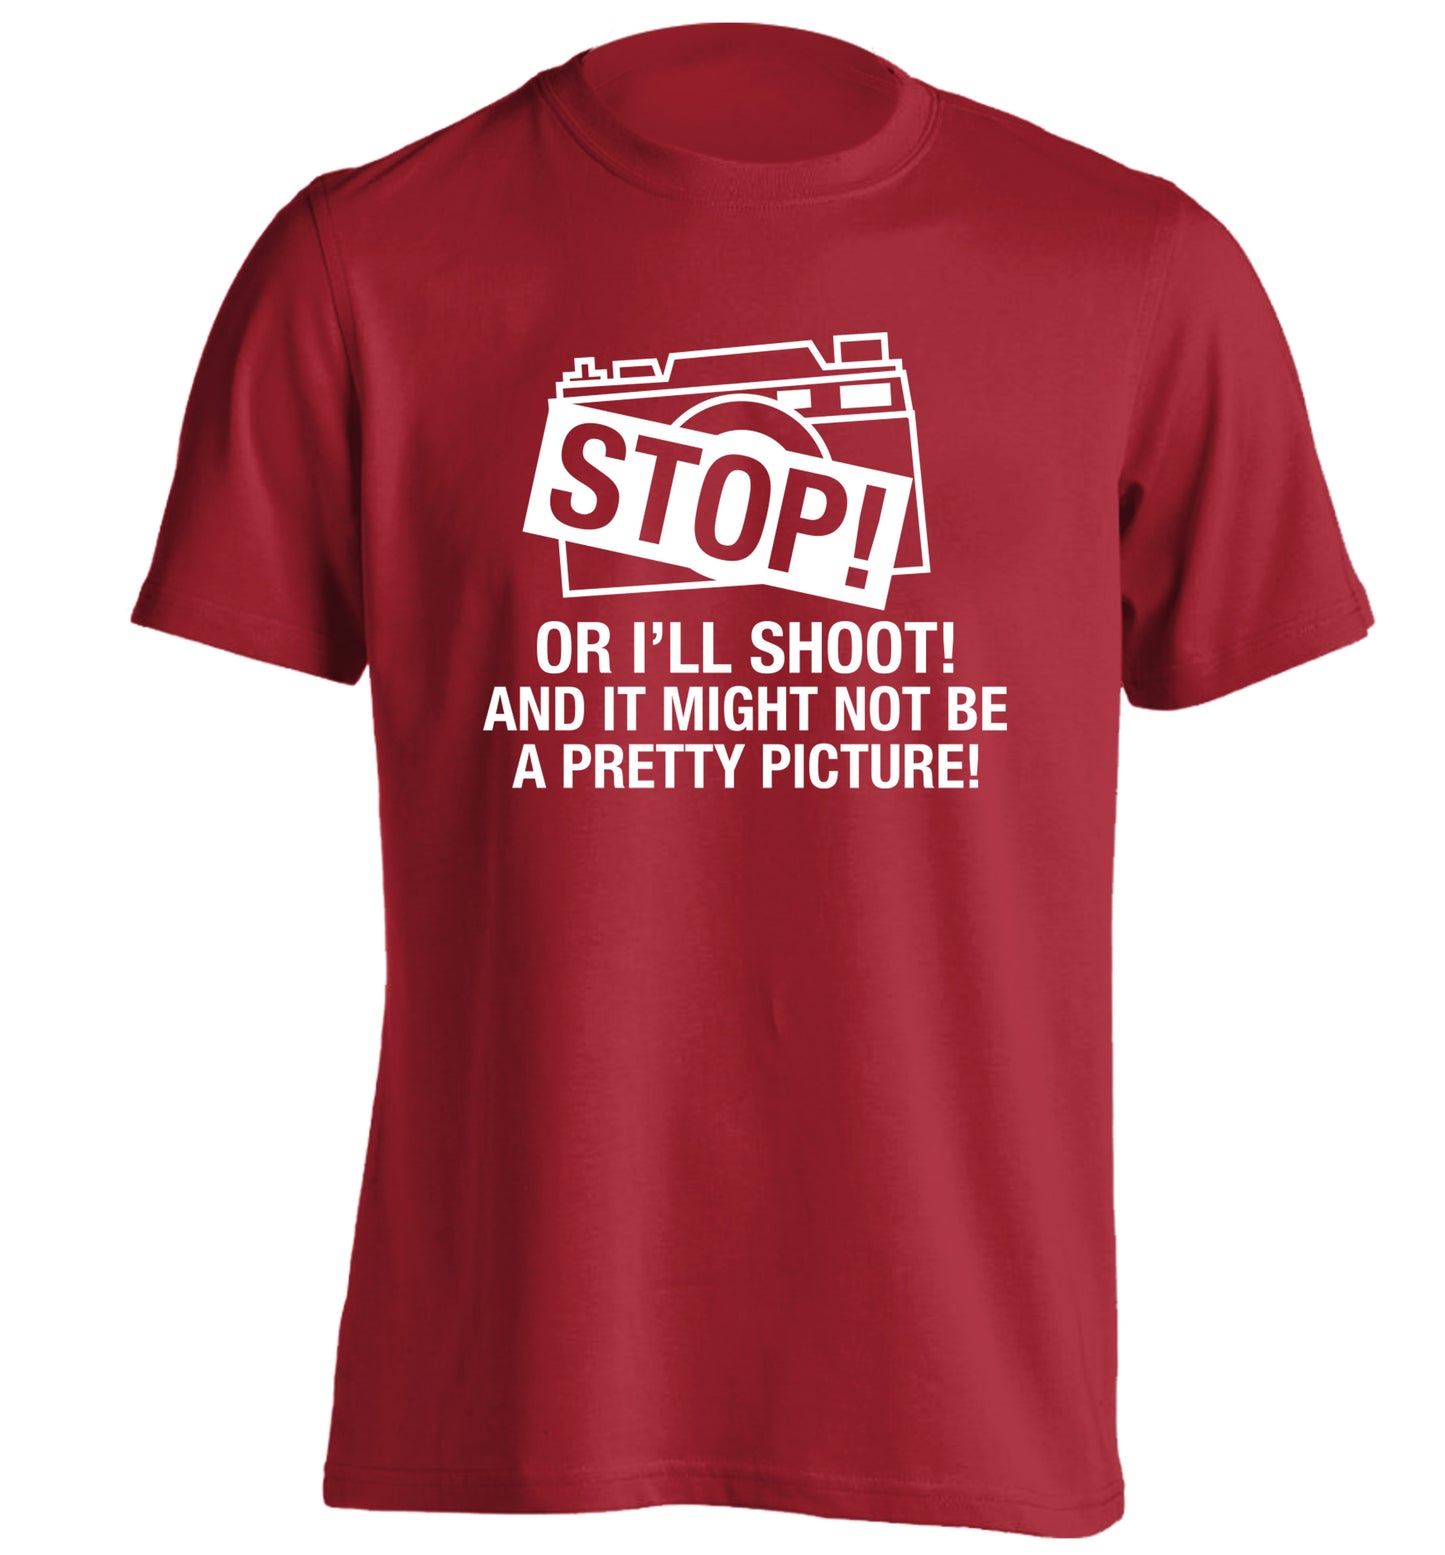 Stop or I'll shoot and it won't be a pretty picture adults unisex red Tshirt 2XL